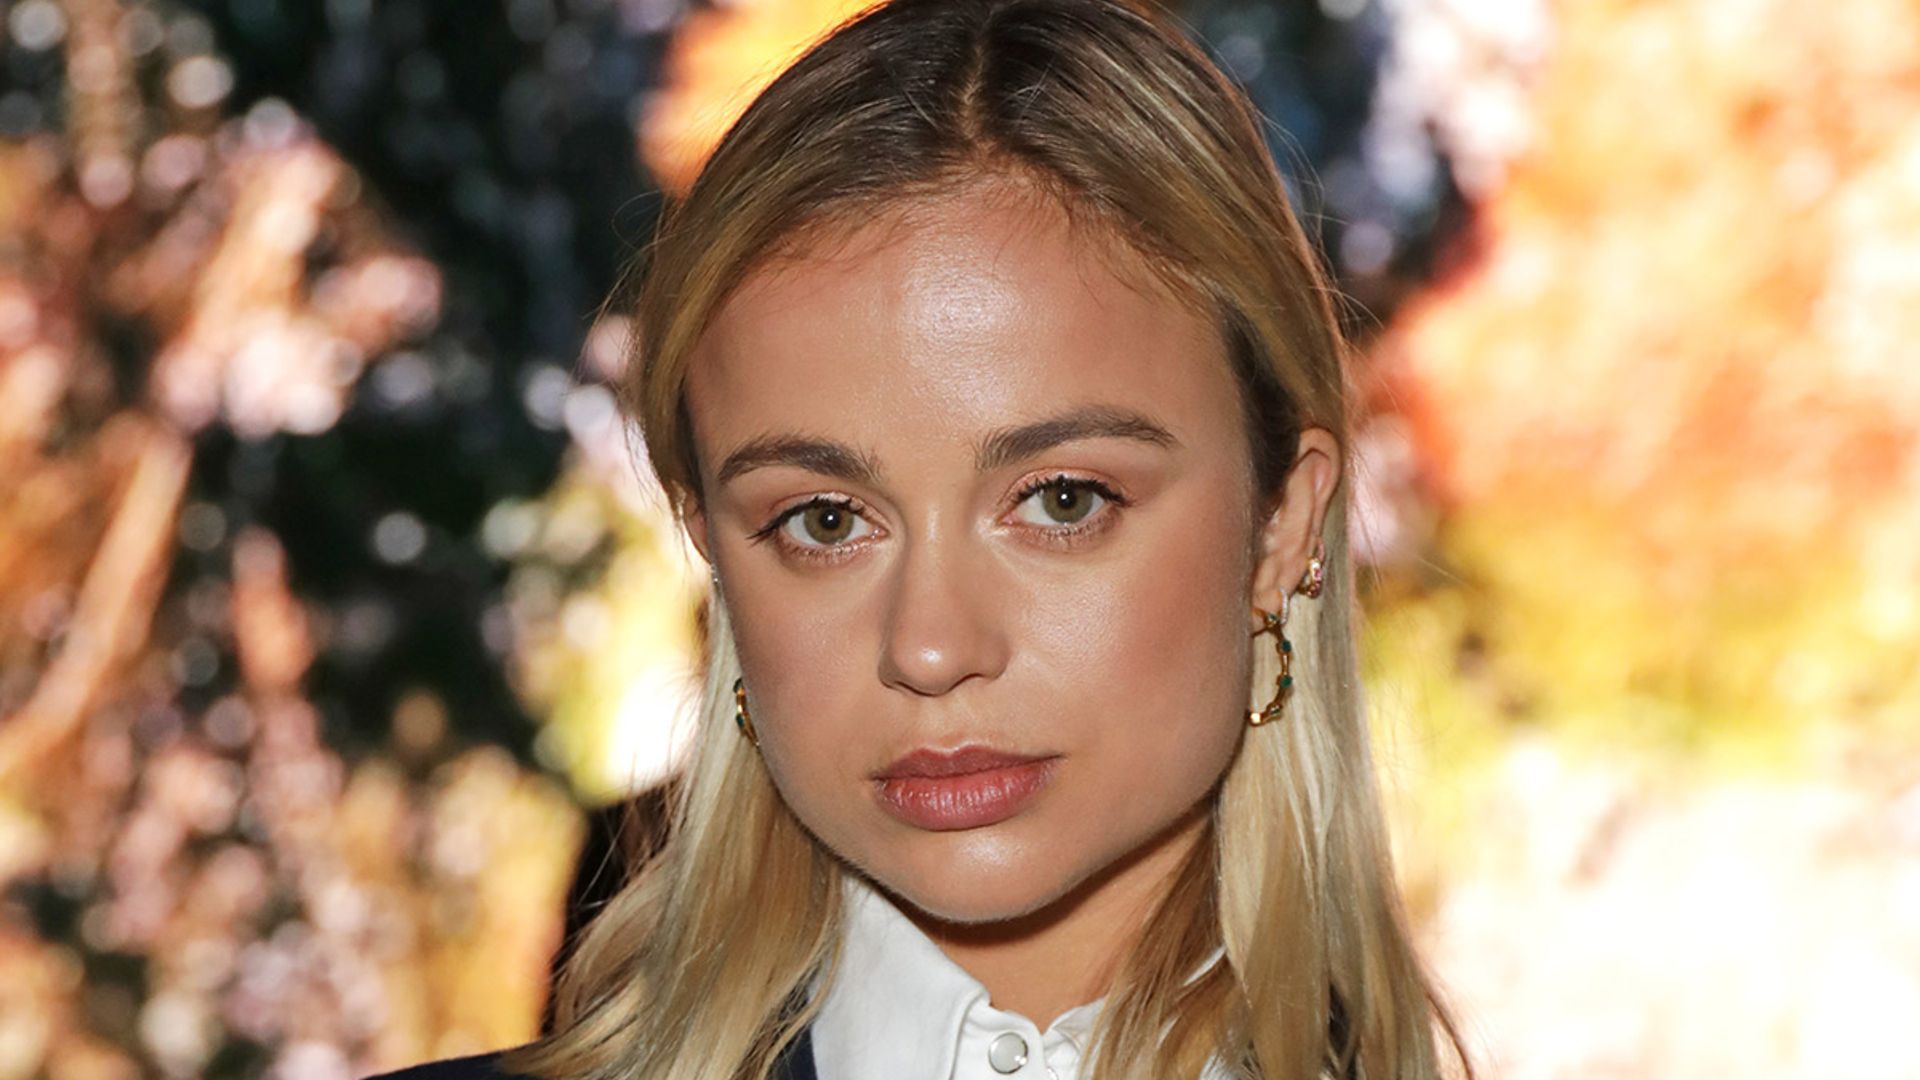 lady amelia windsor hair outfit